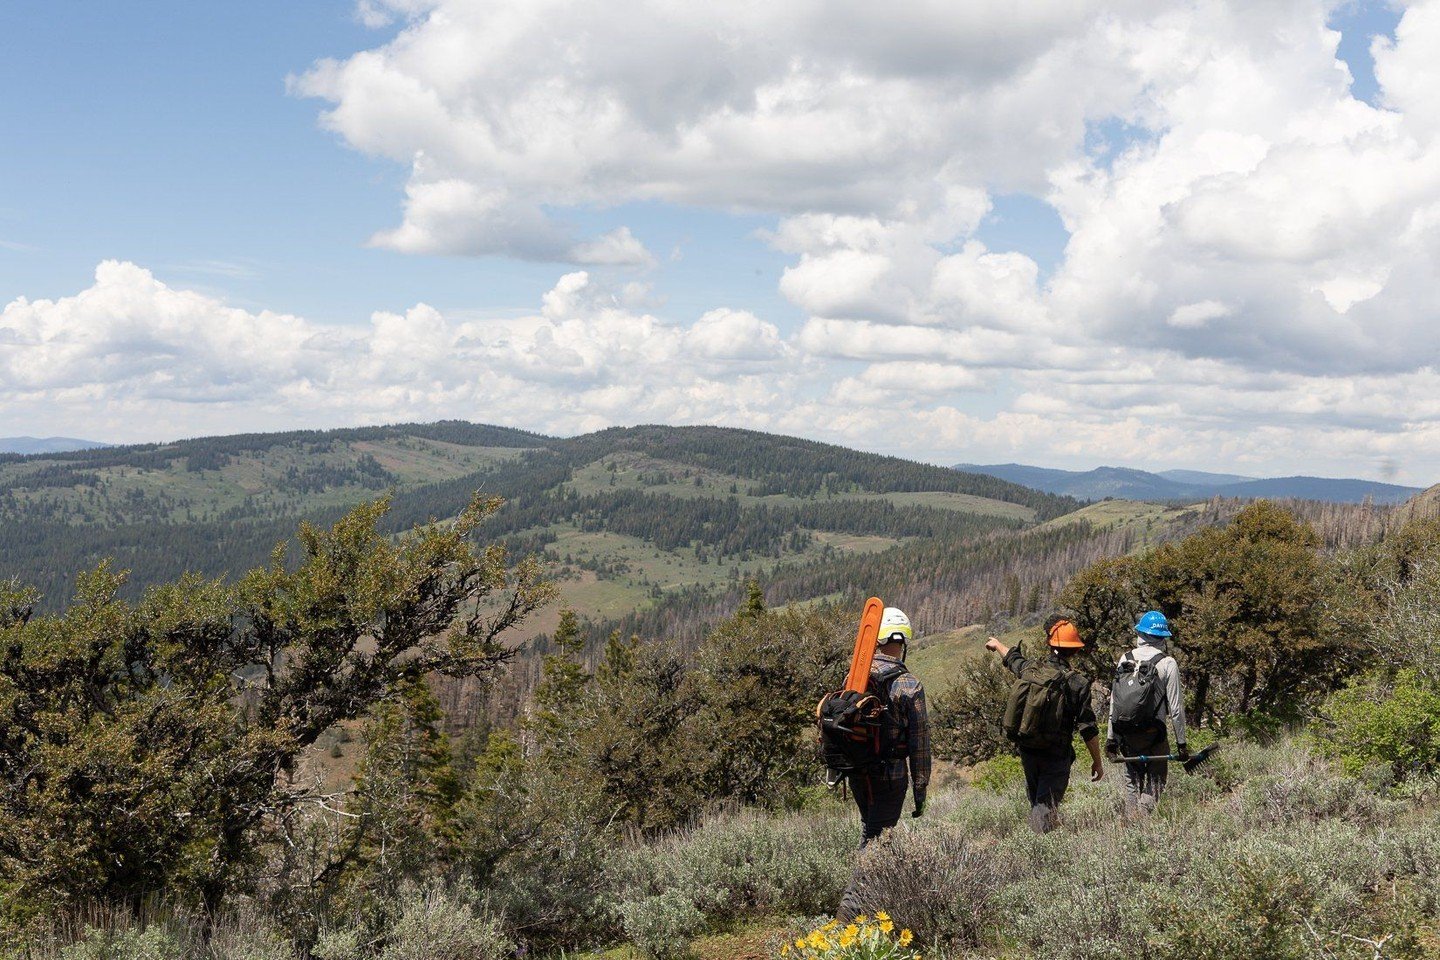 The southernmost 50 miles of the Oregon Timber Trail are challenging. This high-elevation route follows the crest of the Warner Mountains, climbing to 8200 feet at Crane Mountain. It&rsquo;s a remote area where the trail doesn&rsquo;t get much use, s